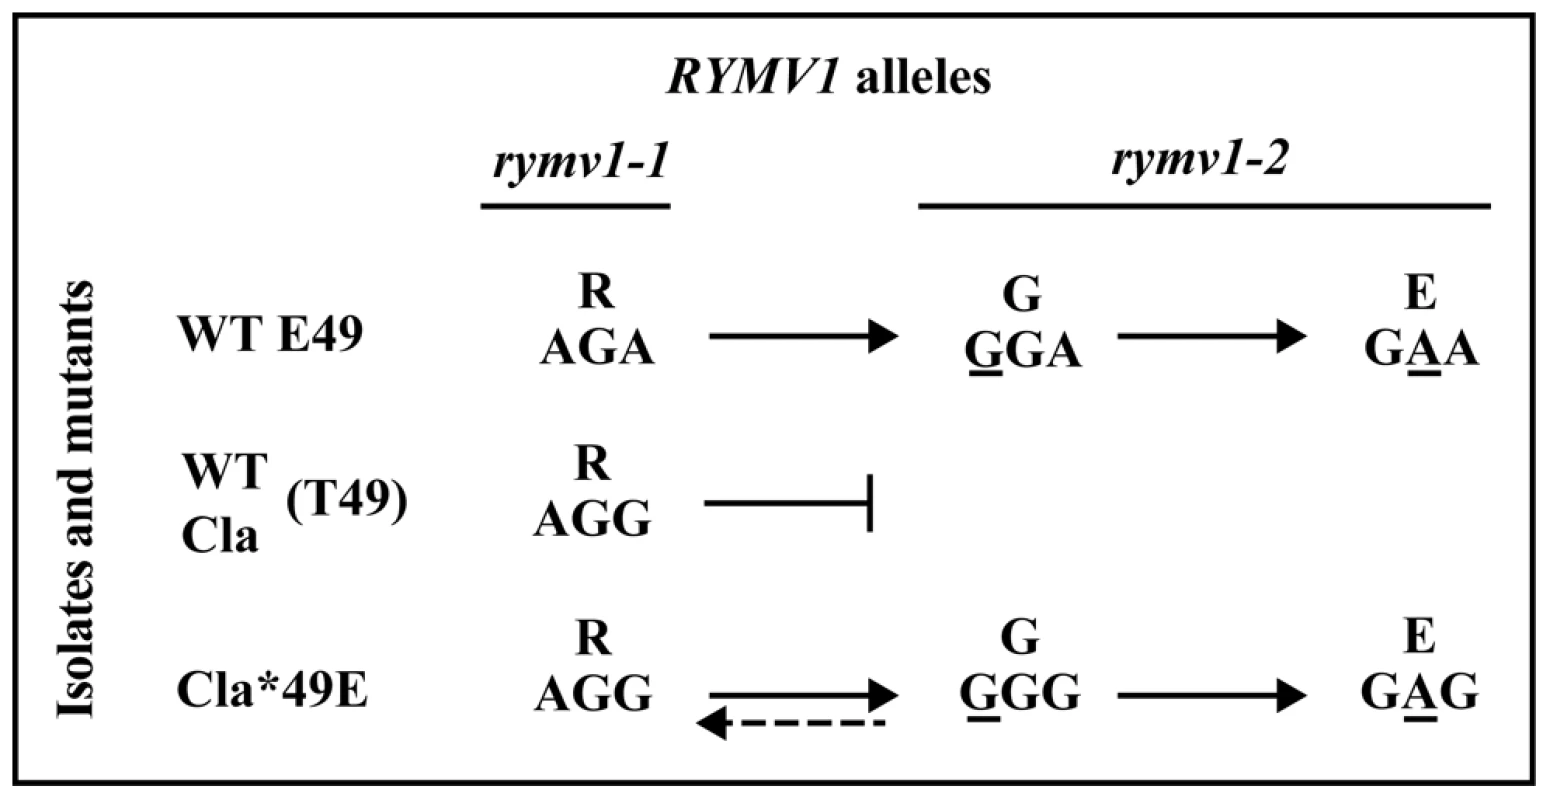 Effect of the amino acid at codon 49 on the <i>rymv1-2</i> mutational pathway.